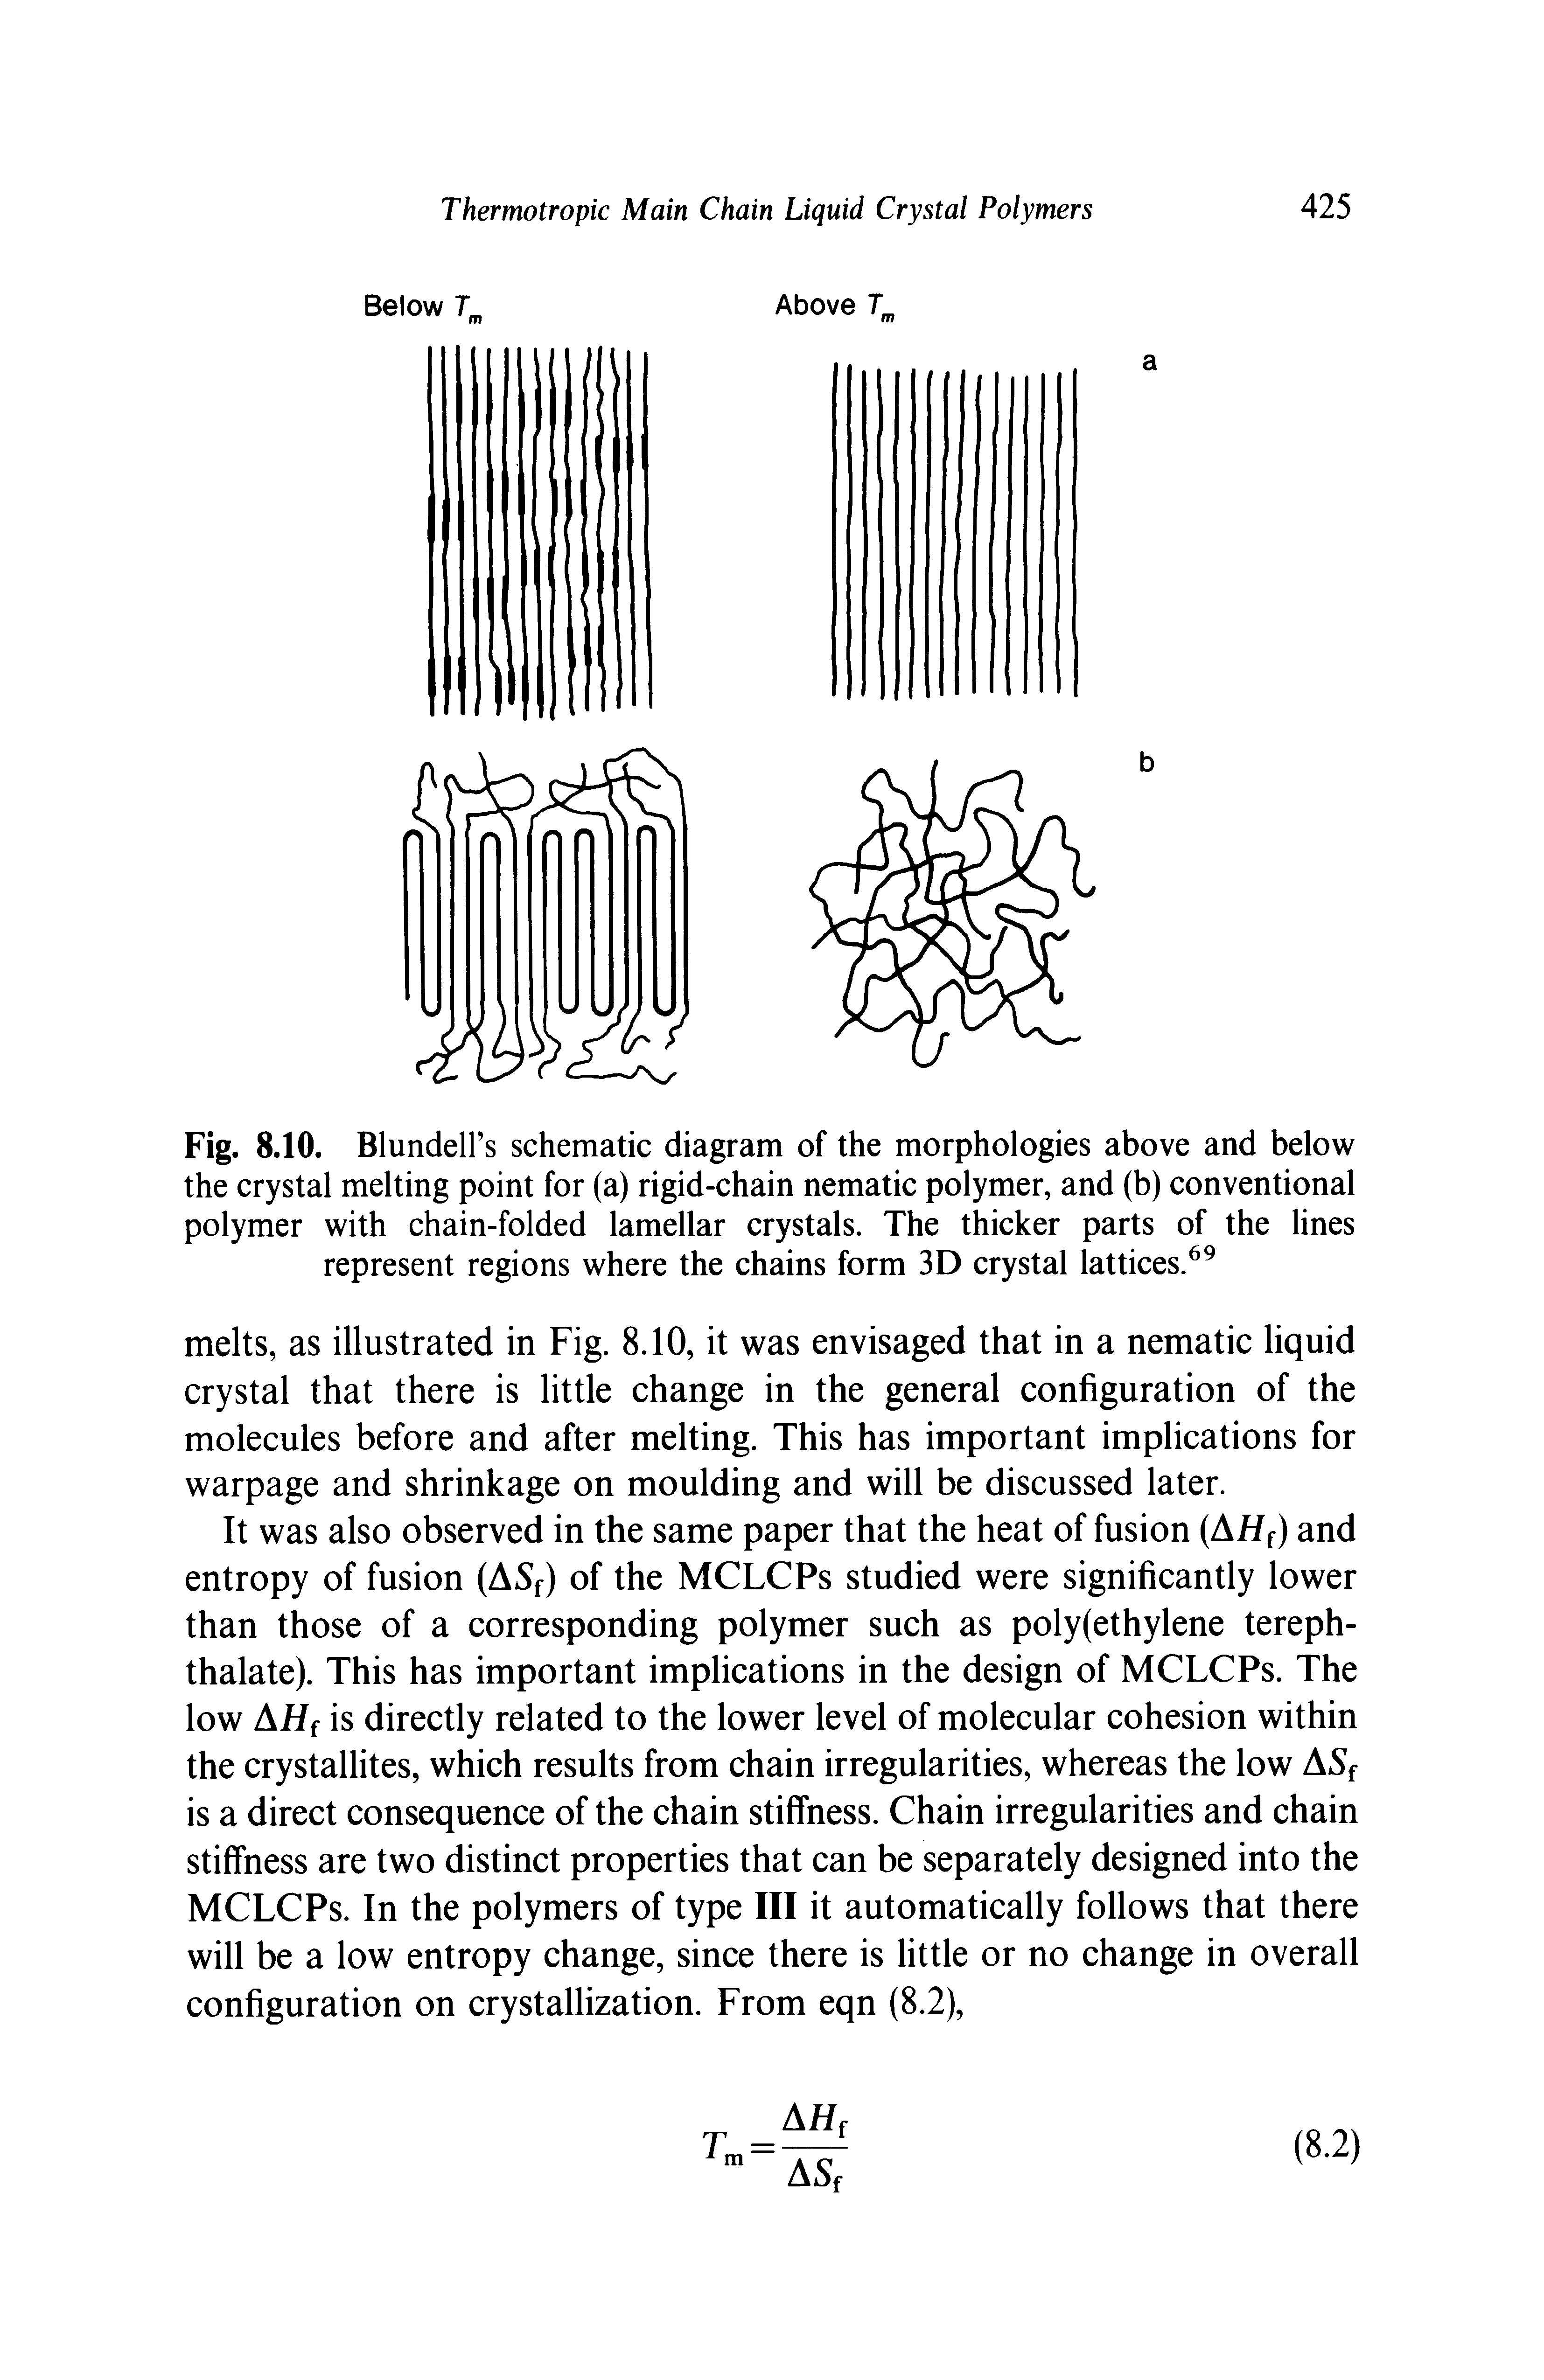 Fig. 8.10. Blundell s schematic diagram of the morphologies above and below the crystal melting point for (a) rigid-chain nematic polymer, and (b) conventional polymer with chain-folded lamellar crystals. The thicker parts of the lines represent regions where the chains form 3D crystal lattices. ...